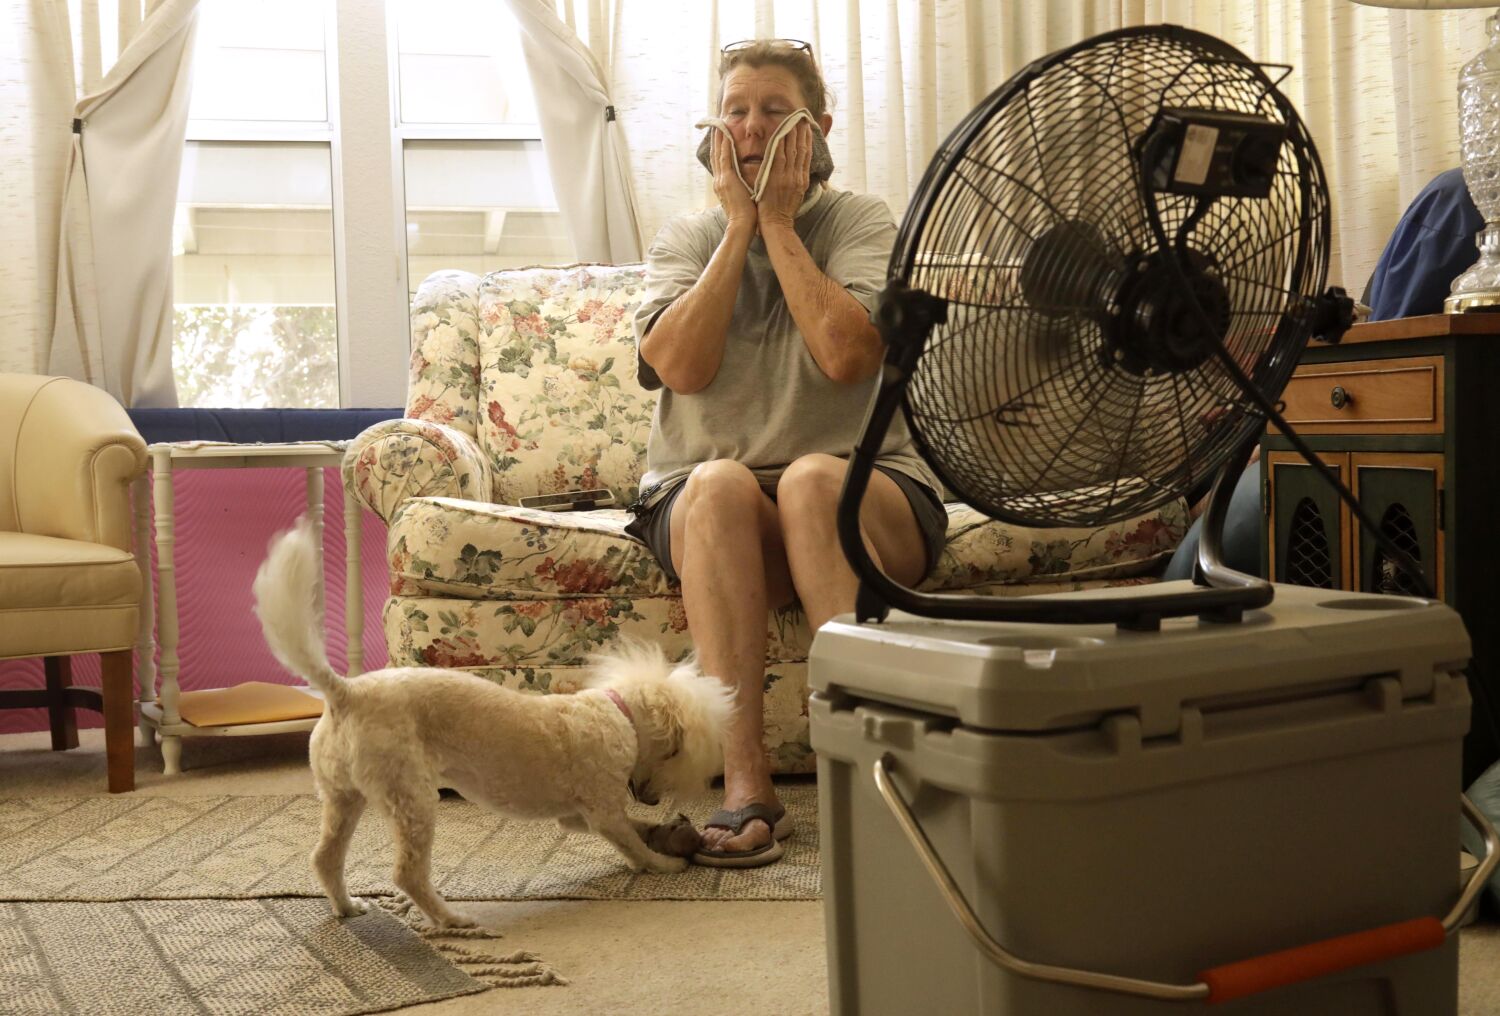 How to get a low-cost A/C unit and other help from LADWP to beat the next heat wave